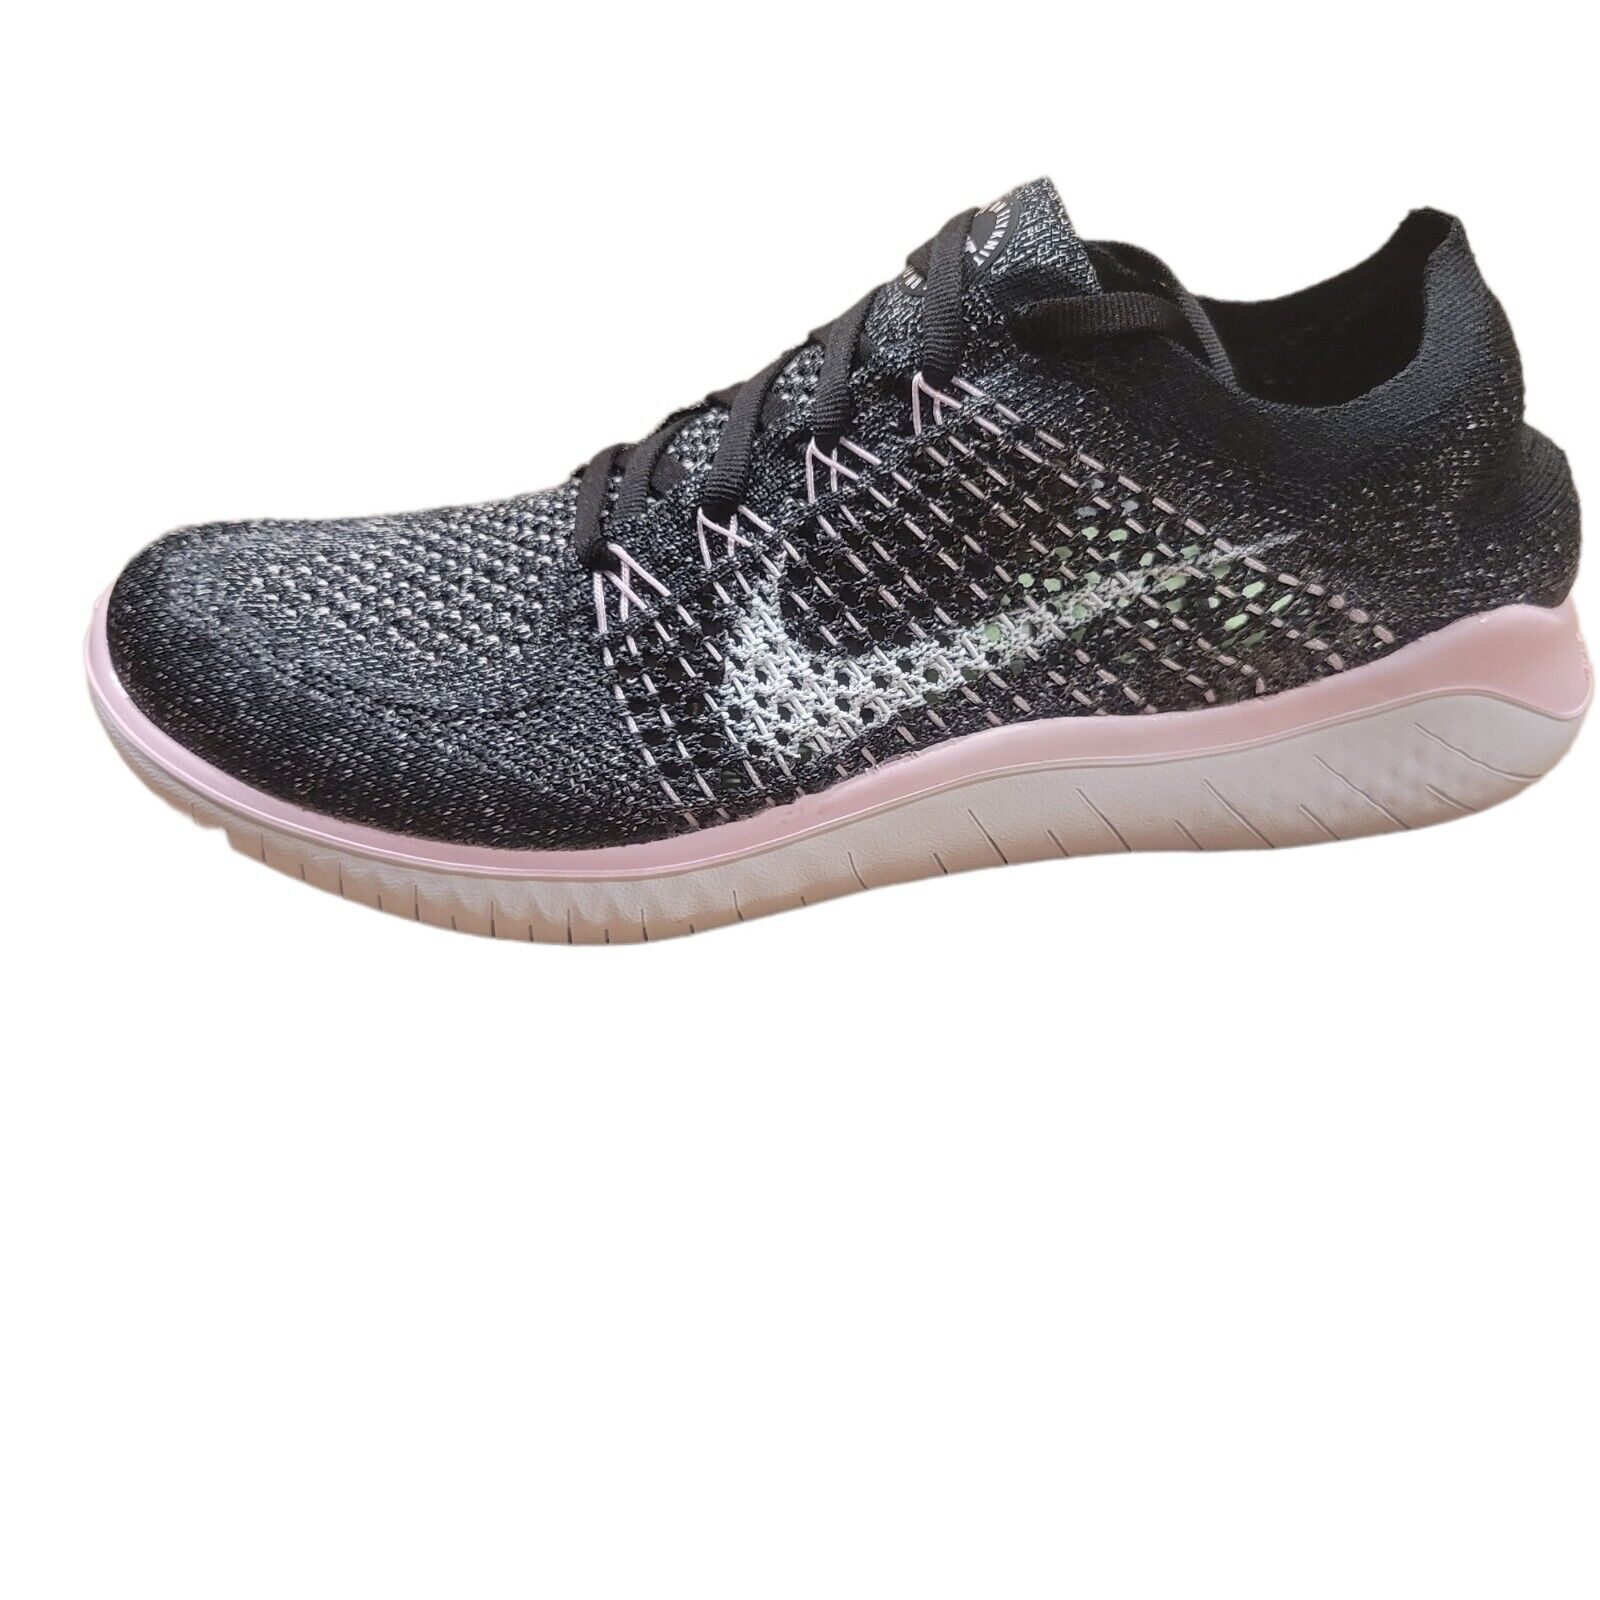 Nike Free RN Flyknit 2018 Womens Running Shoes Black Pink 942839-007 NEW  Multi